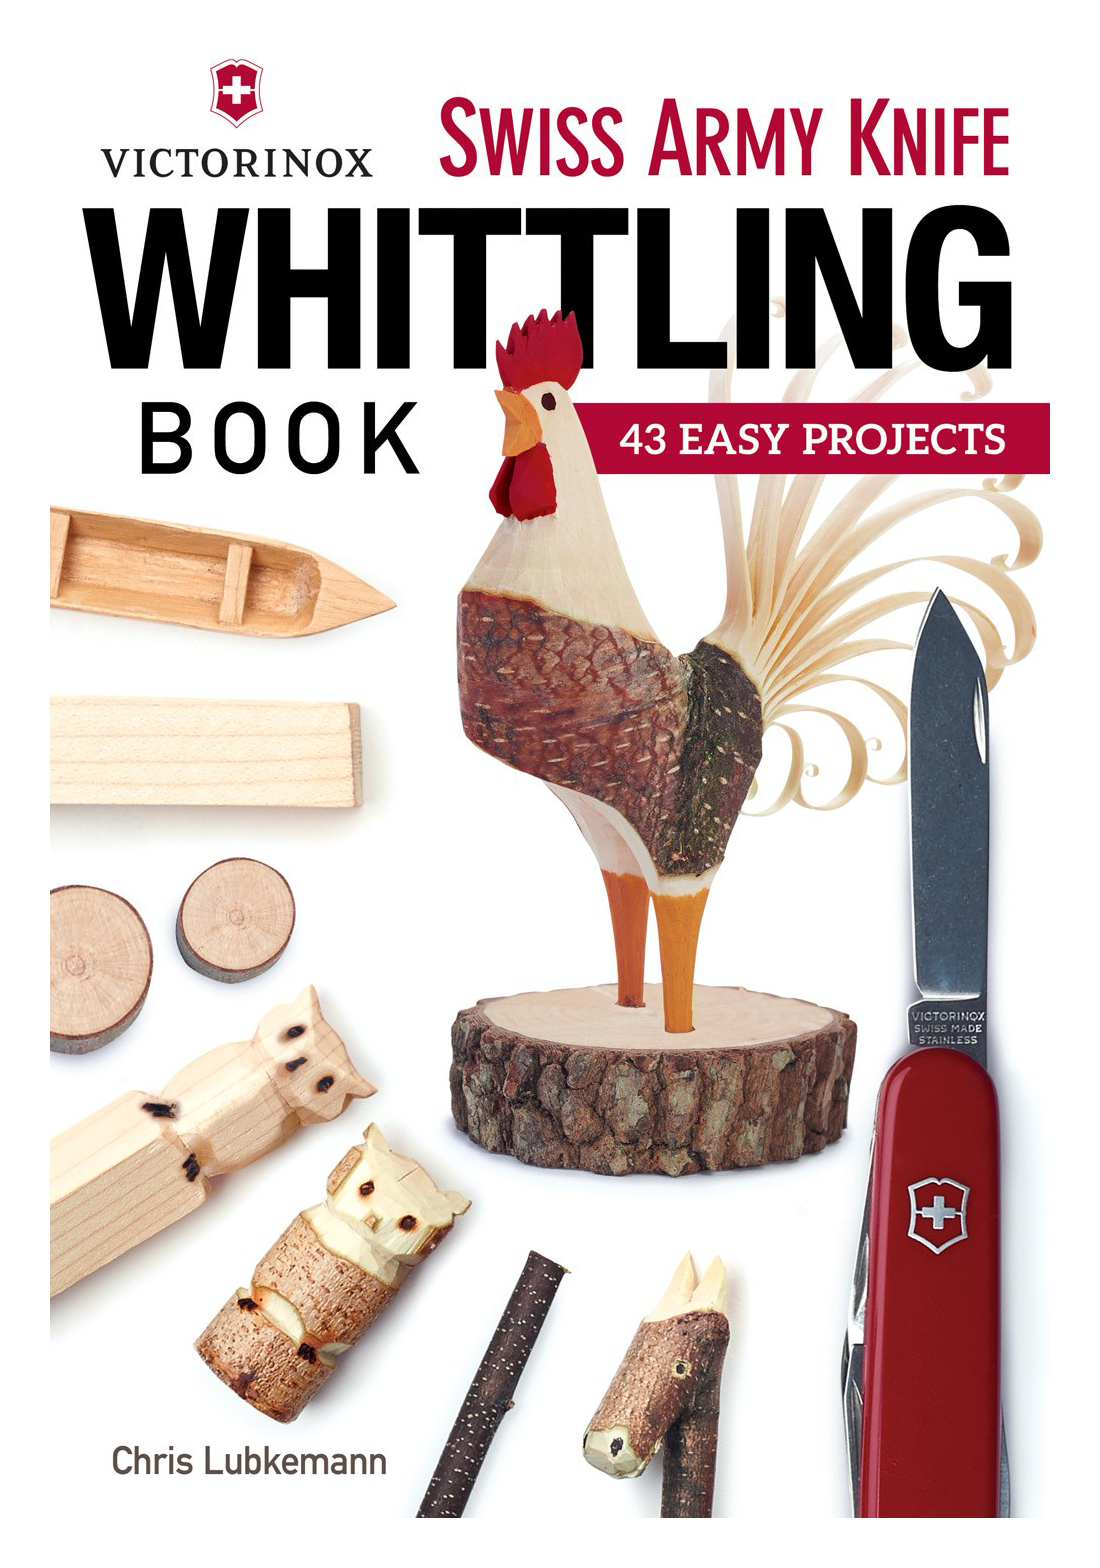 Victorinox Swiss Army Knife Whittling Book: 43 Easy Projects Book by Chris Lubkemann